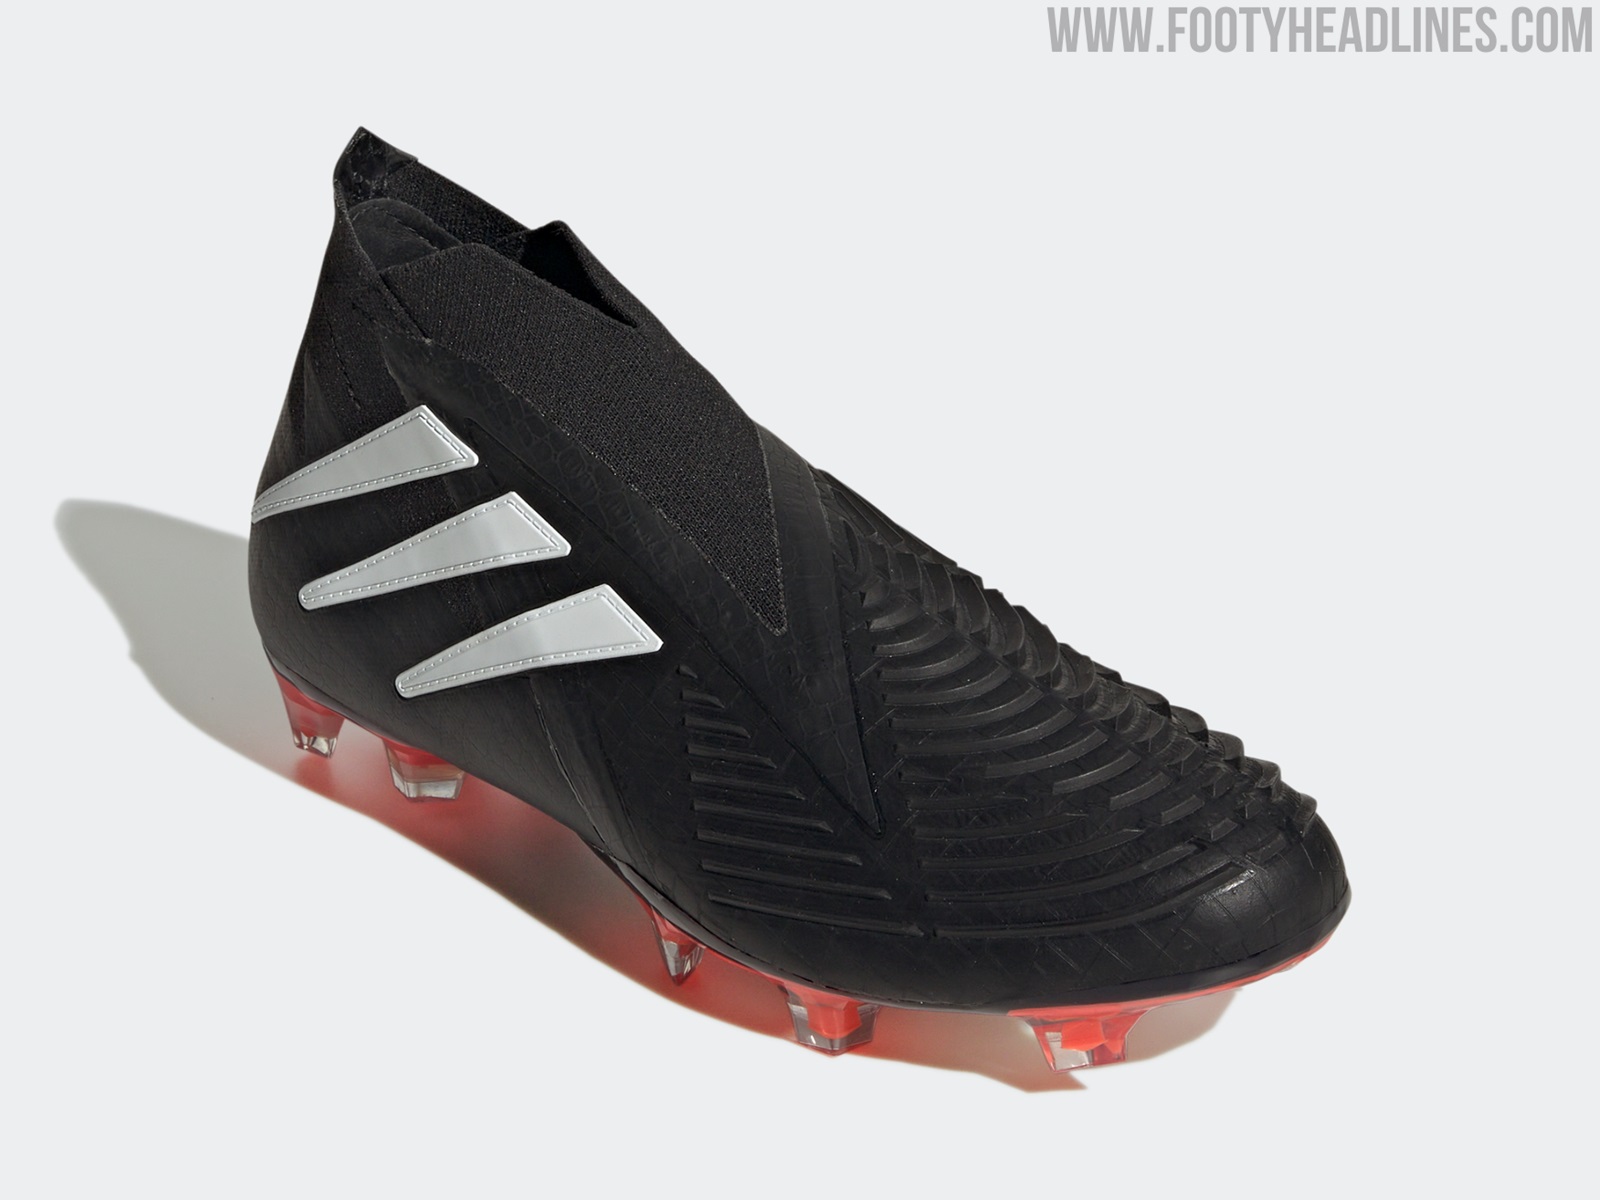 Adidas Predator Edge 94 Boots Released - Inspired by the First